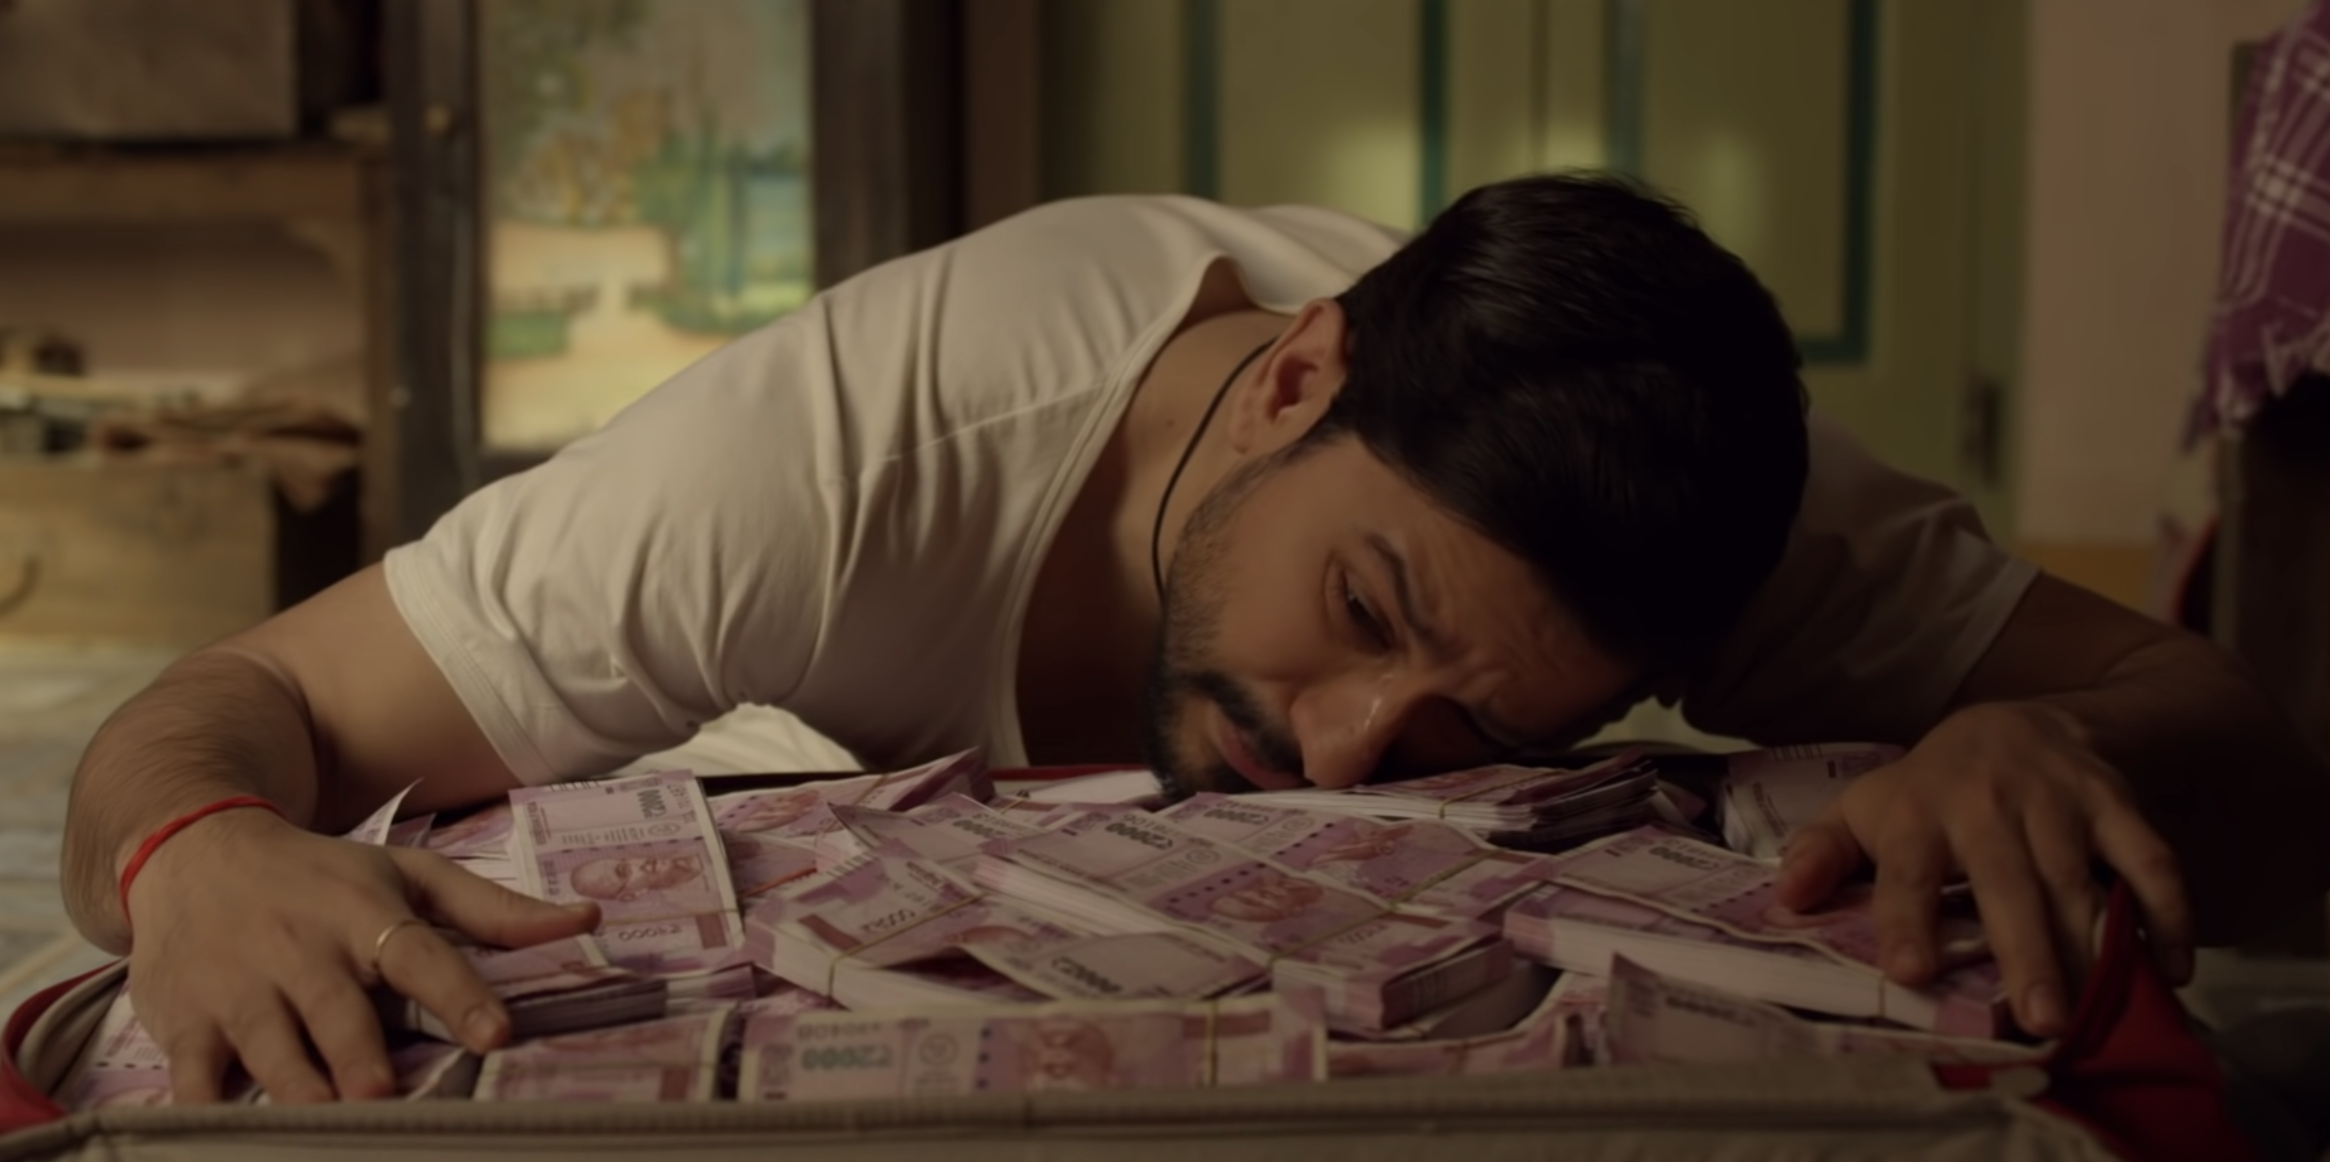 Kunal Khemu resting his head and hands on an open suitcase filled with cash